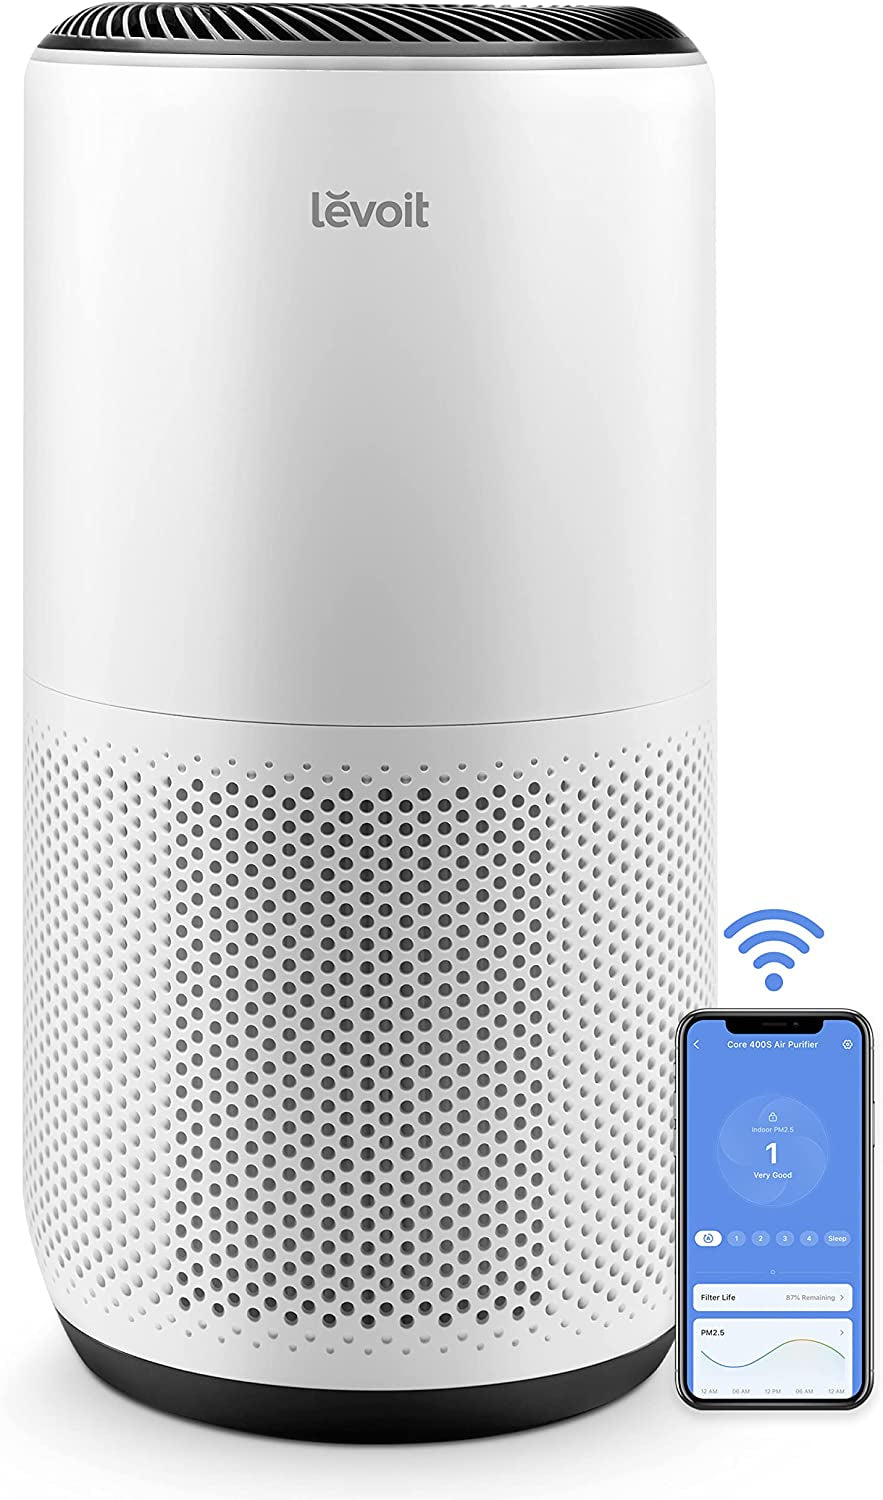 Air Purifiers for Home Large Room, Smart Wifi and PM2.5 Monitor H13 True HEPA Filter Removes up to 99.97% of Particles, Pet Allergies, Smoke, Dust, Auto Mode, Alexa Control, White